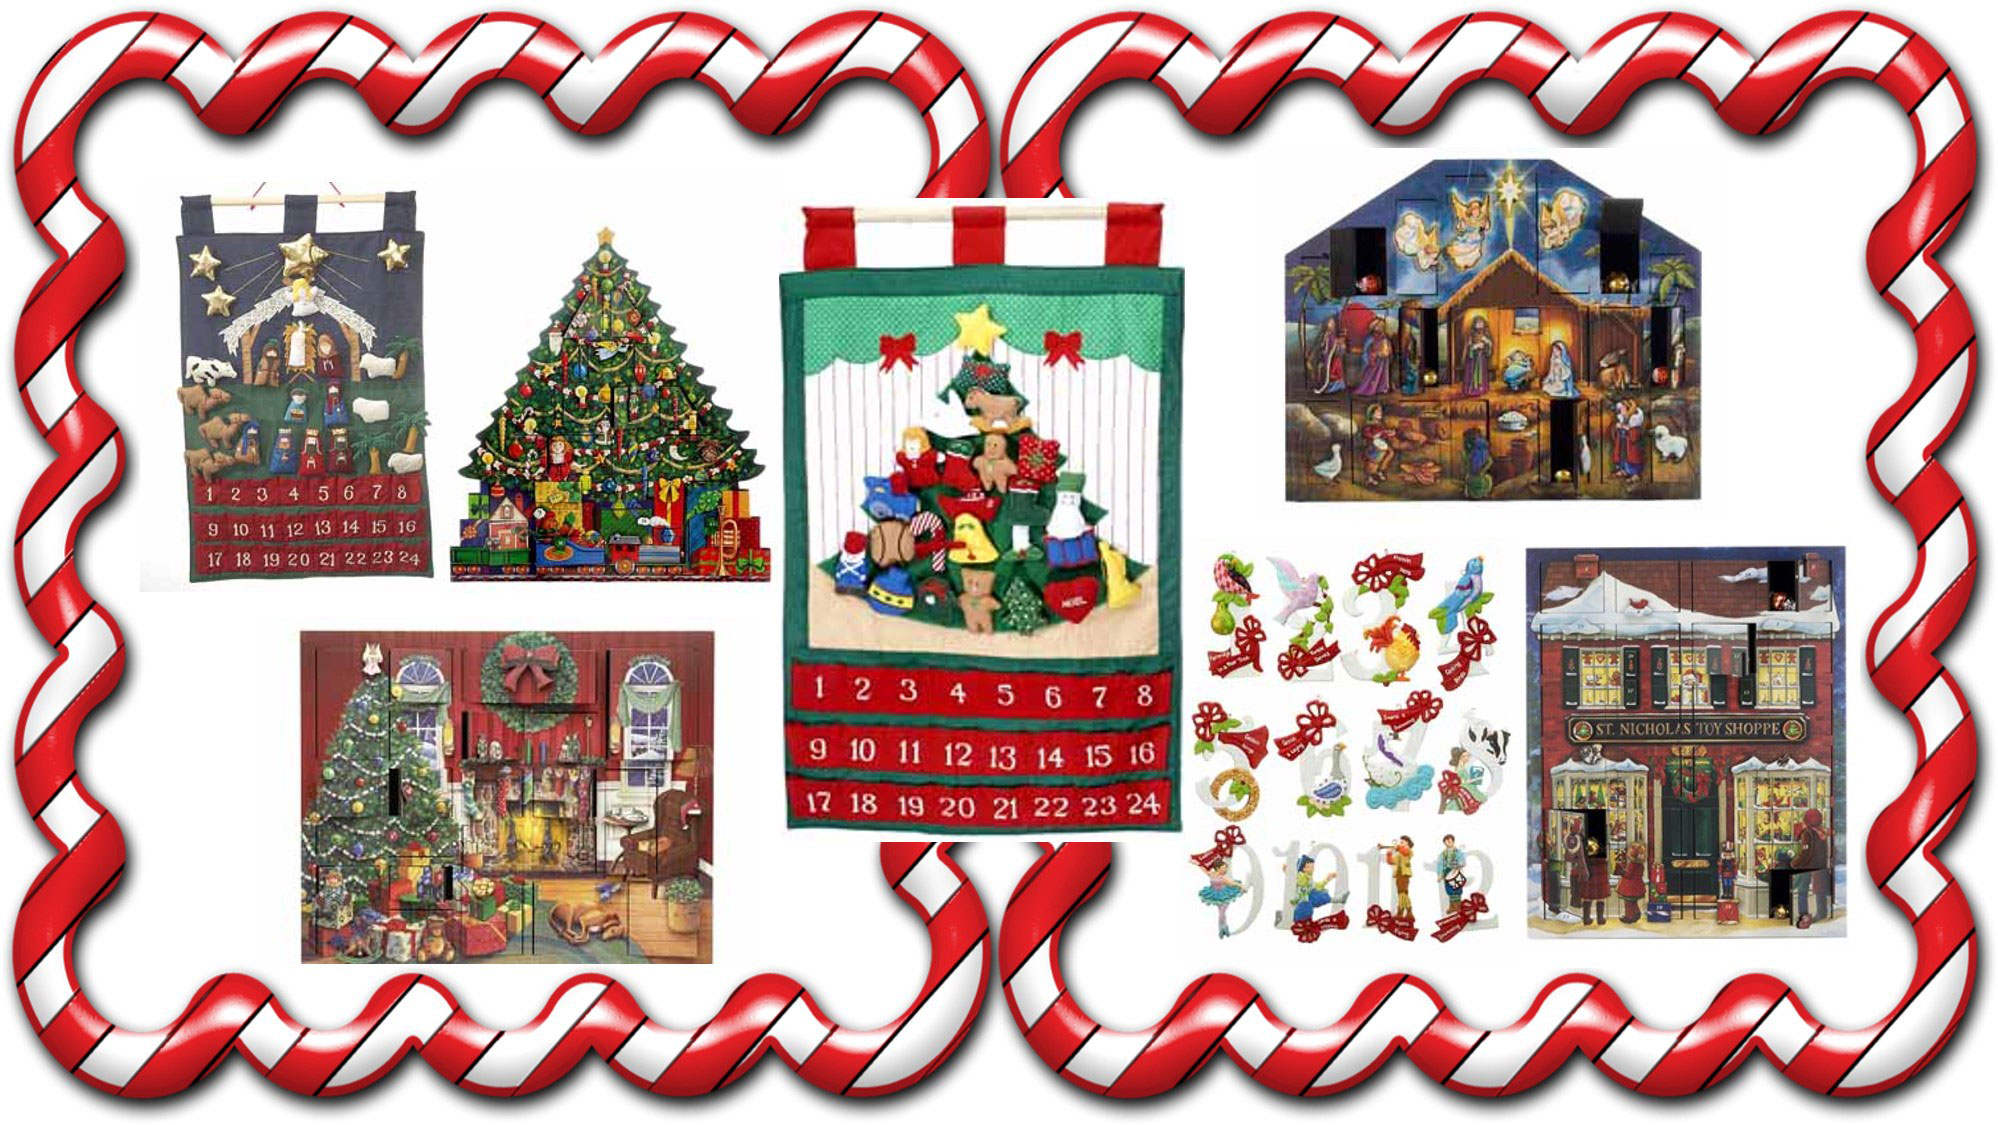 A collection of Advent decorations including ornaments, calendars, and table decorations. | OrnamentShop.com